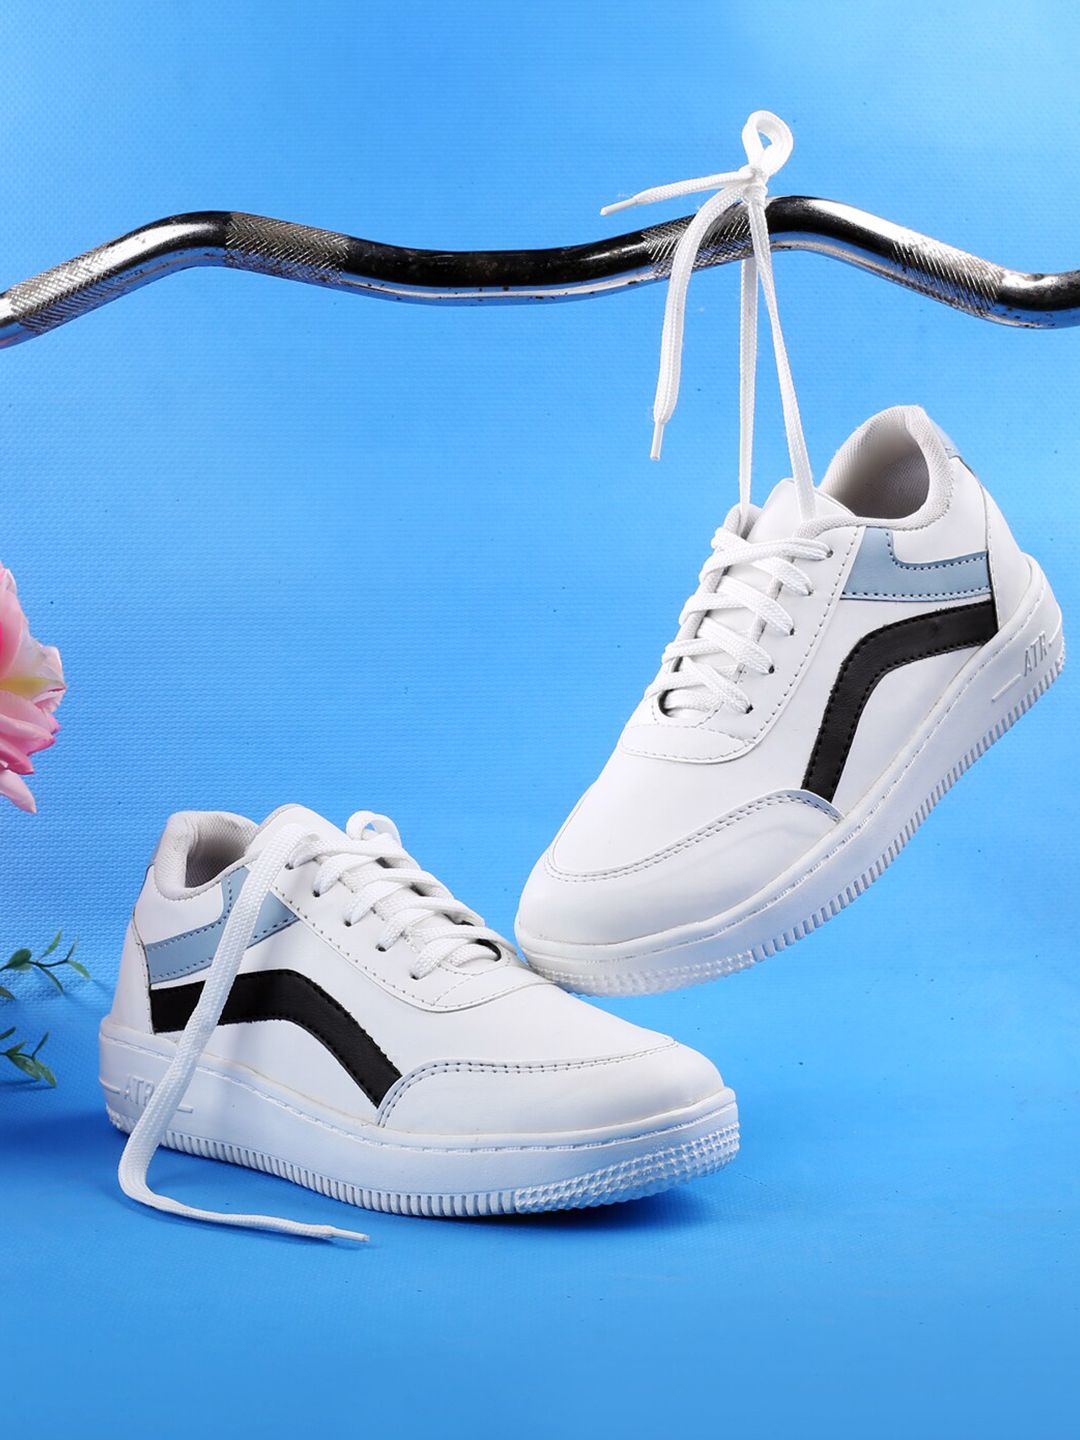 mr.wonker Women 3D Chassis Colourblocked Deziner Sports Shoes Price in India